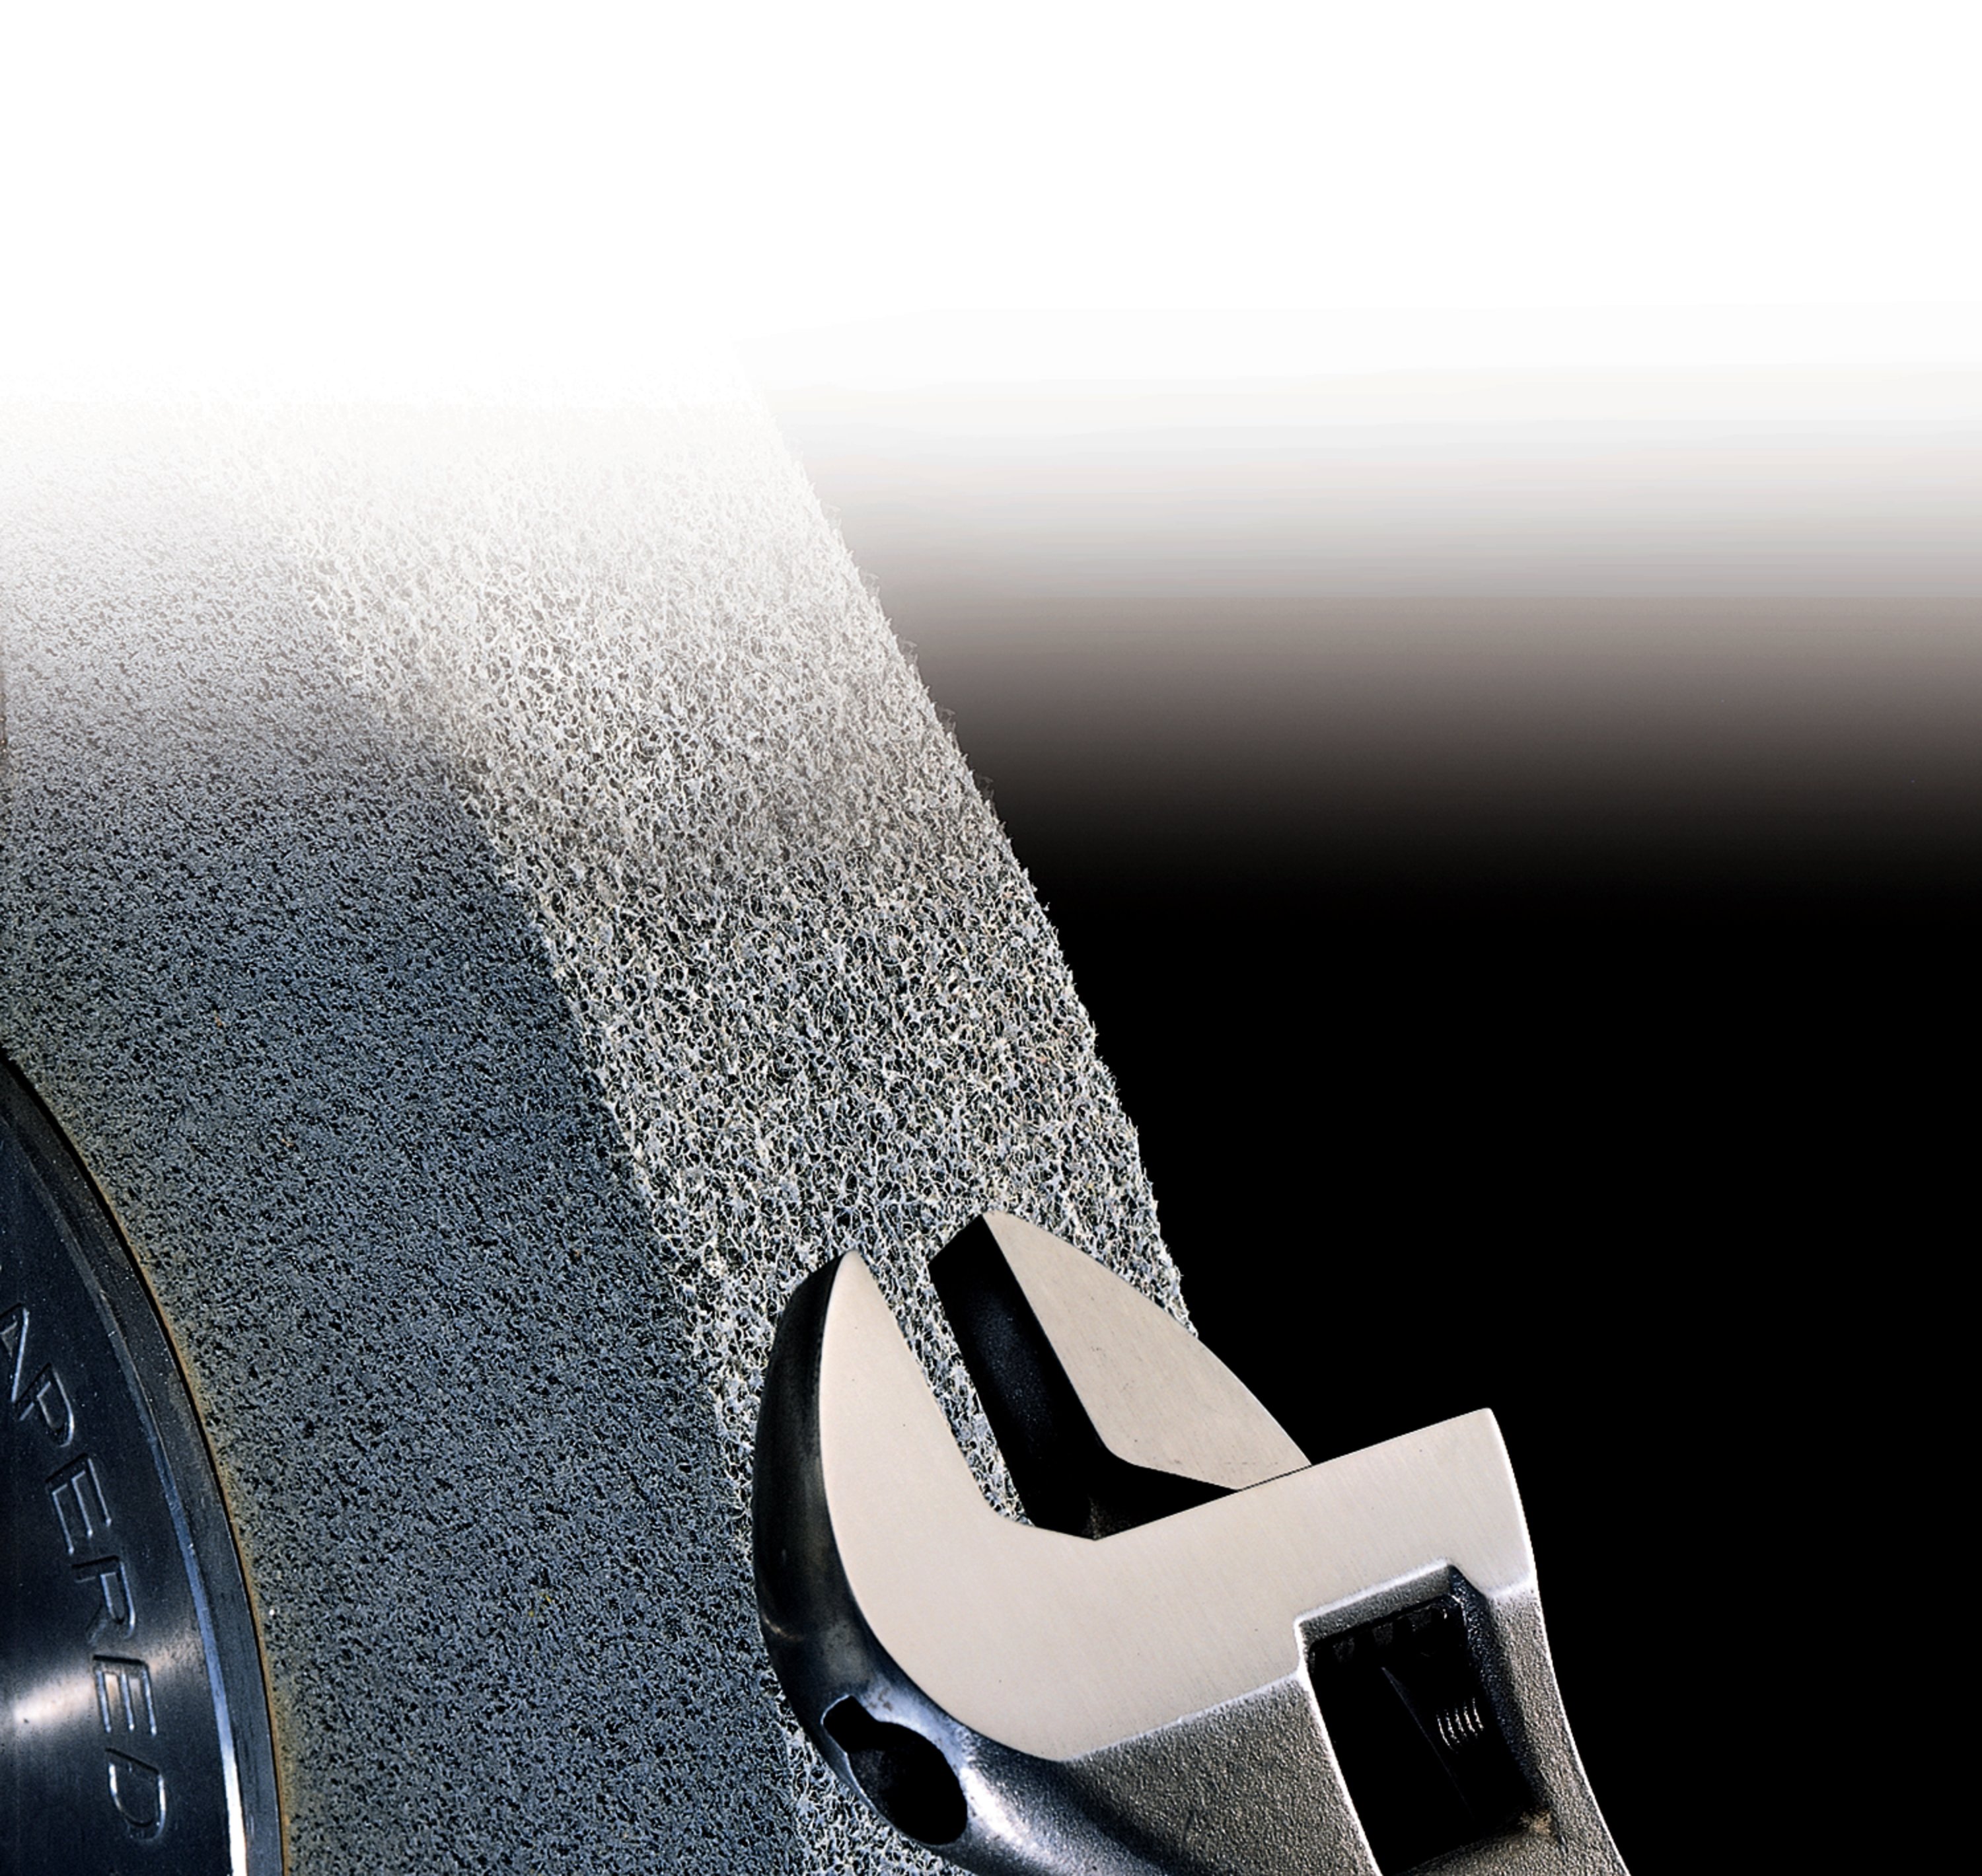 Our Scotch-Brite™ SST Deburring Wheel is strong enough to easily remove burrs and radius edges resulting from drilling, stamping, punching and other machining operations, while not disturbing critical tolerances. It is used extensively in the aerospace industry for deburring and finishing turbine blades and vanes, polishing and blending surgical instruments, and deburring aluminum die cast flashing, among other uses.